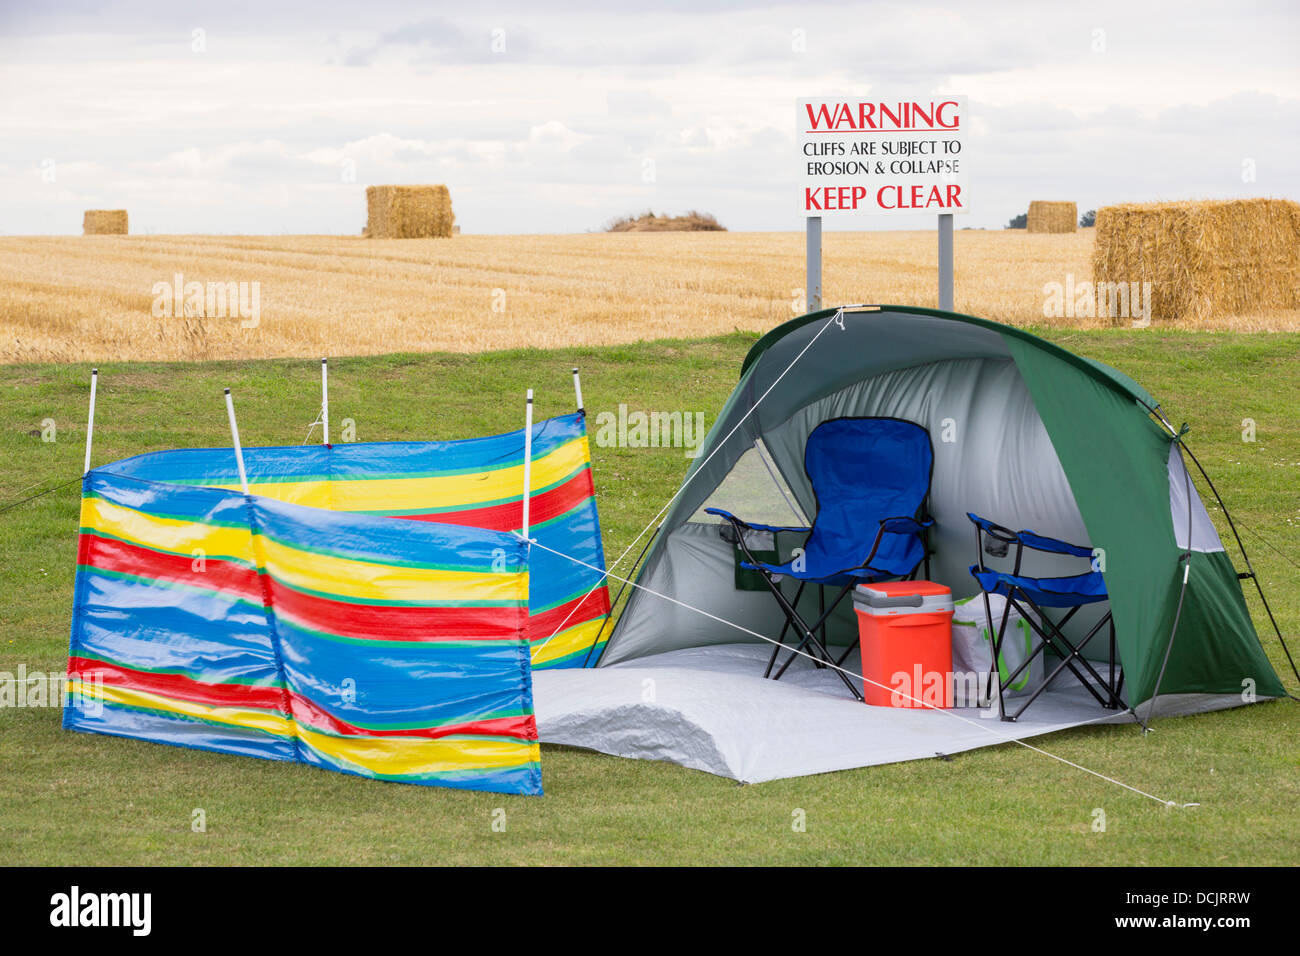 A warning sign on a caravan park near the edge of collapsing coastal cliffs at Aldbrough on Yorkshires East Coast, UK. Stock Photo